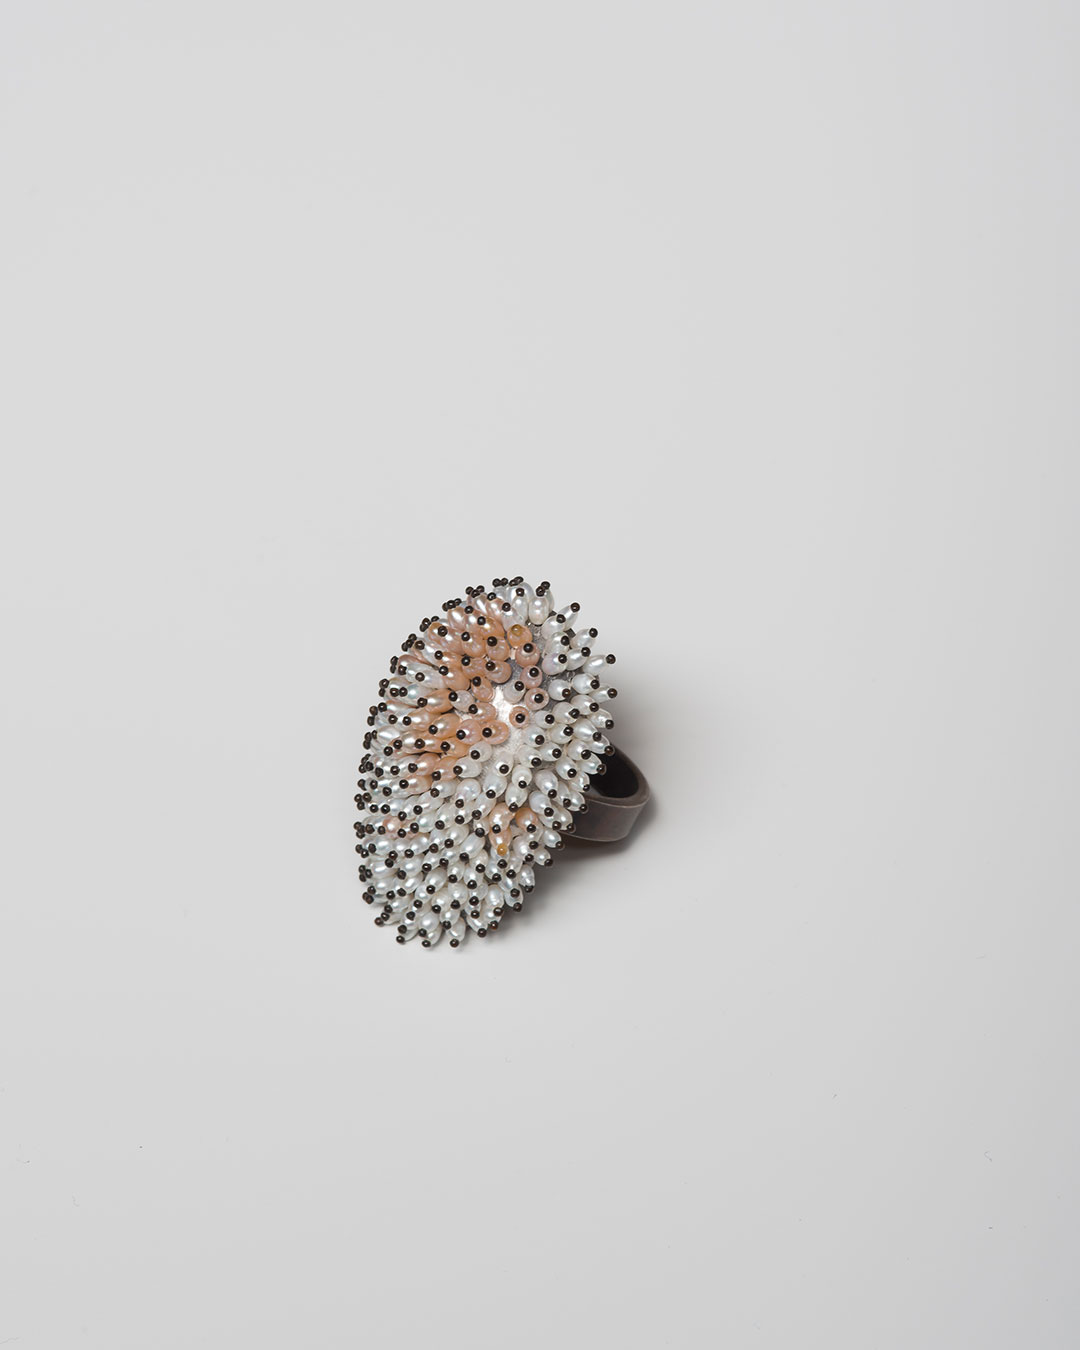 Sam Tho Duong, Look, 2020, ring; silver, freshwater pearls, nylon, €1360